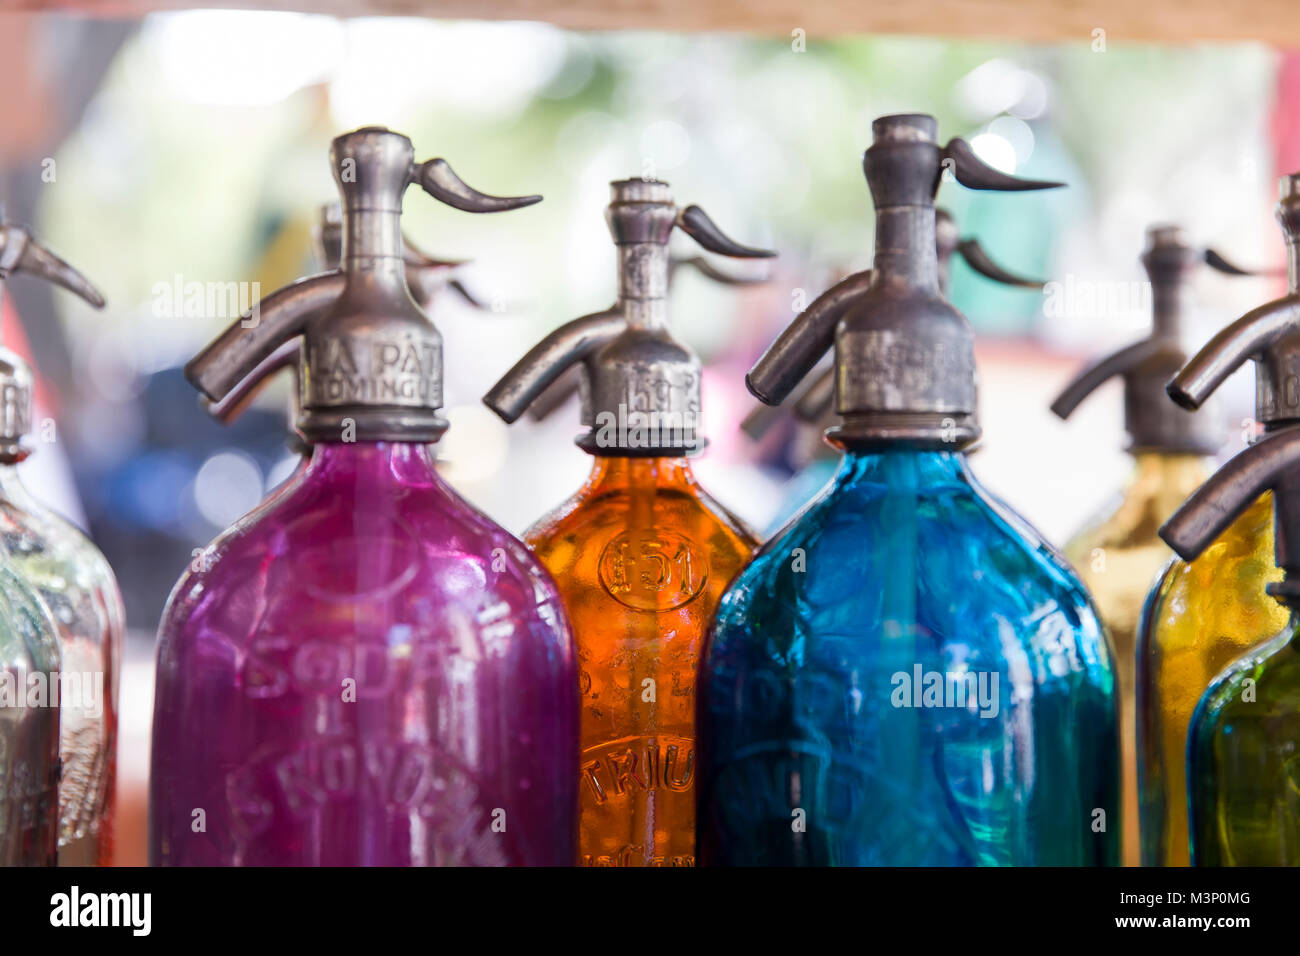 BUENOS AIRES, ARGENTINA - JANUARY 21, 2018: Soda bottles at San Telmo flea market in Buenos Aires, Argentina. With more than 154 liters per person in  Stock Photo